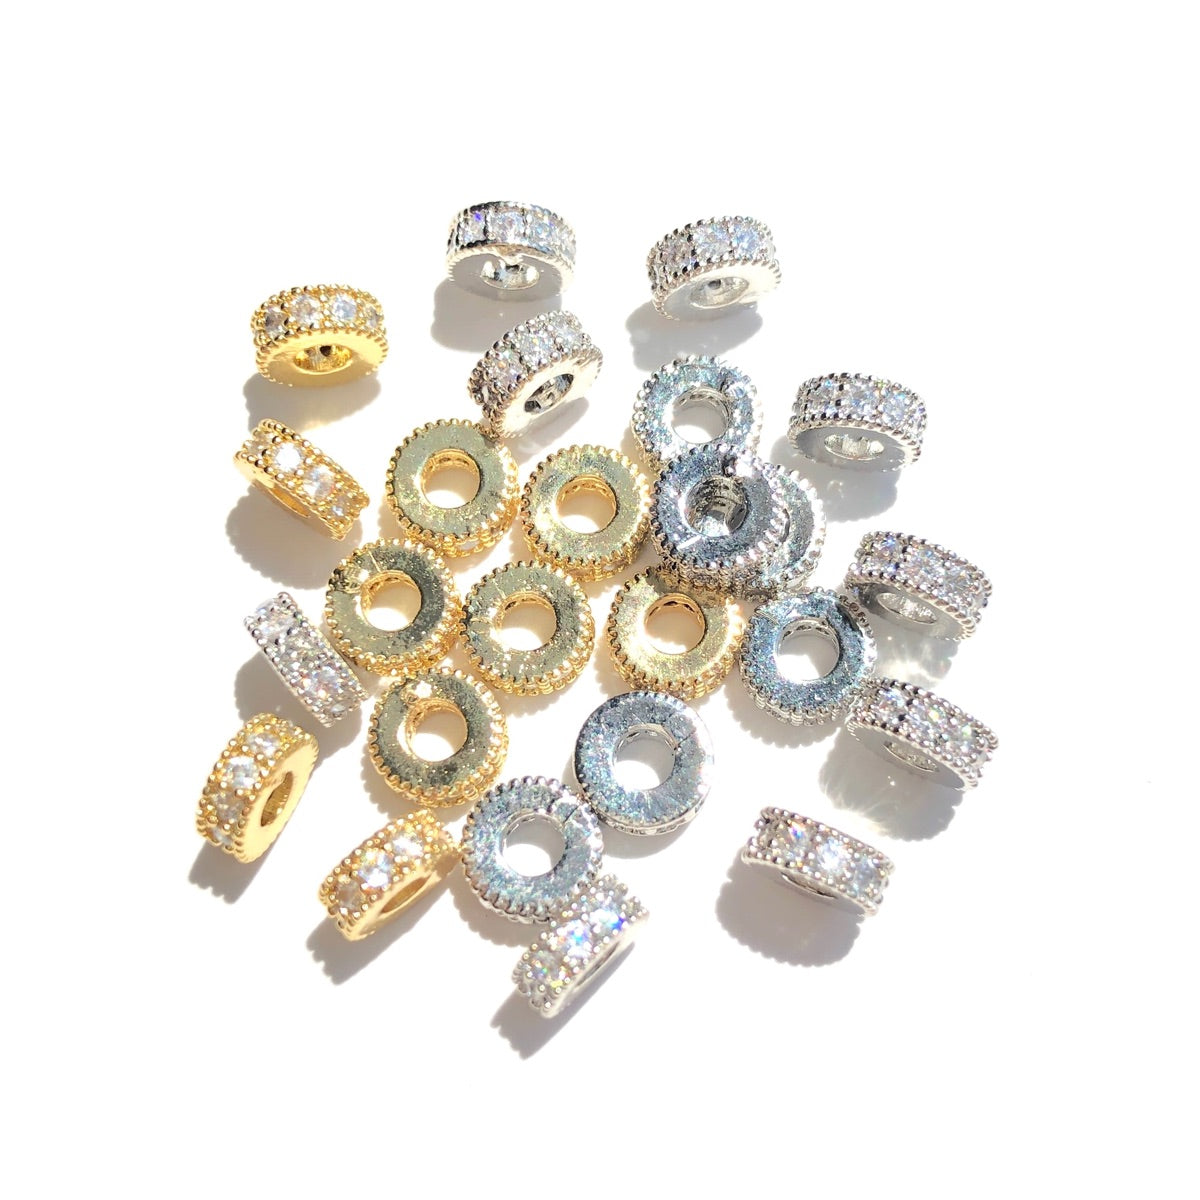 20-50pcs/lot 5.8*2.5mm CZ Paved Small Rondelle Wheel Spacers Mix Colors CZ Paved Spacers New Spacers Arrivals Rondelle Beads Wholesale Charms Beads Beyond